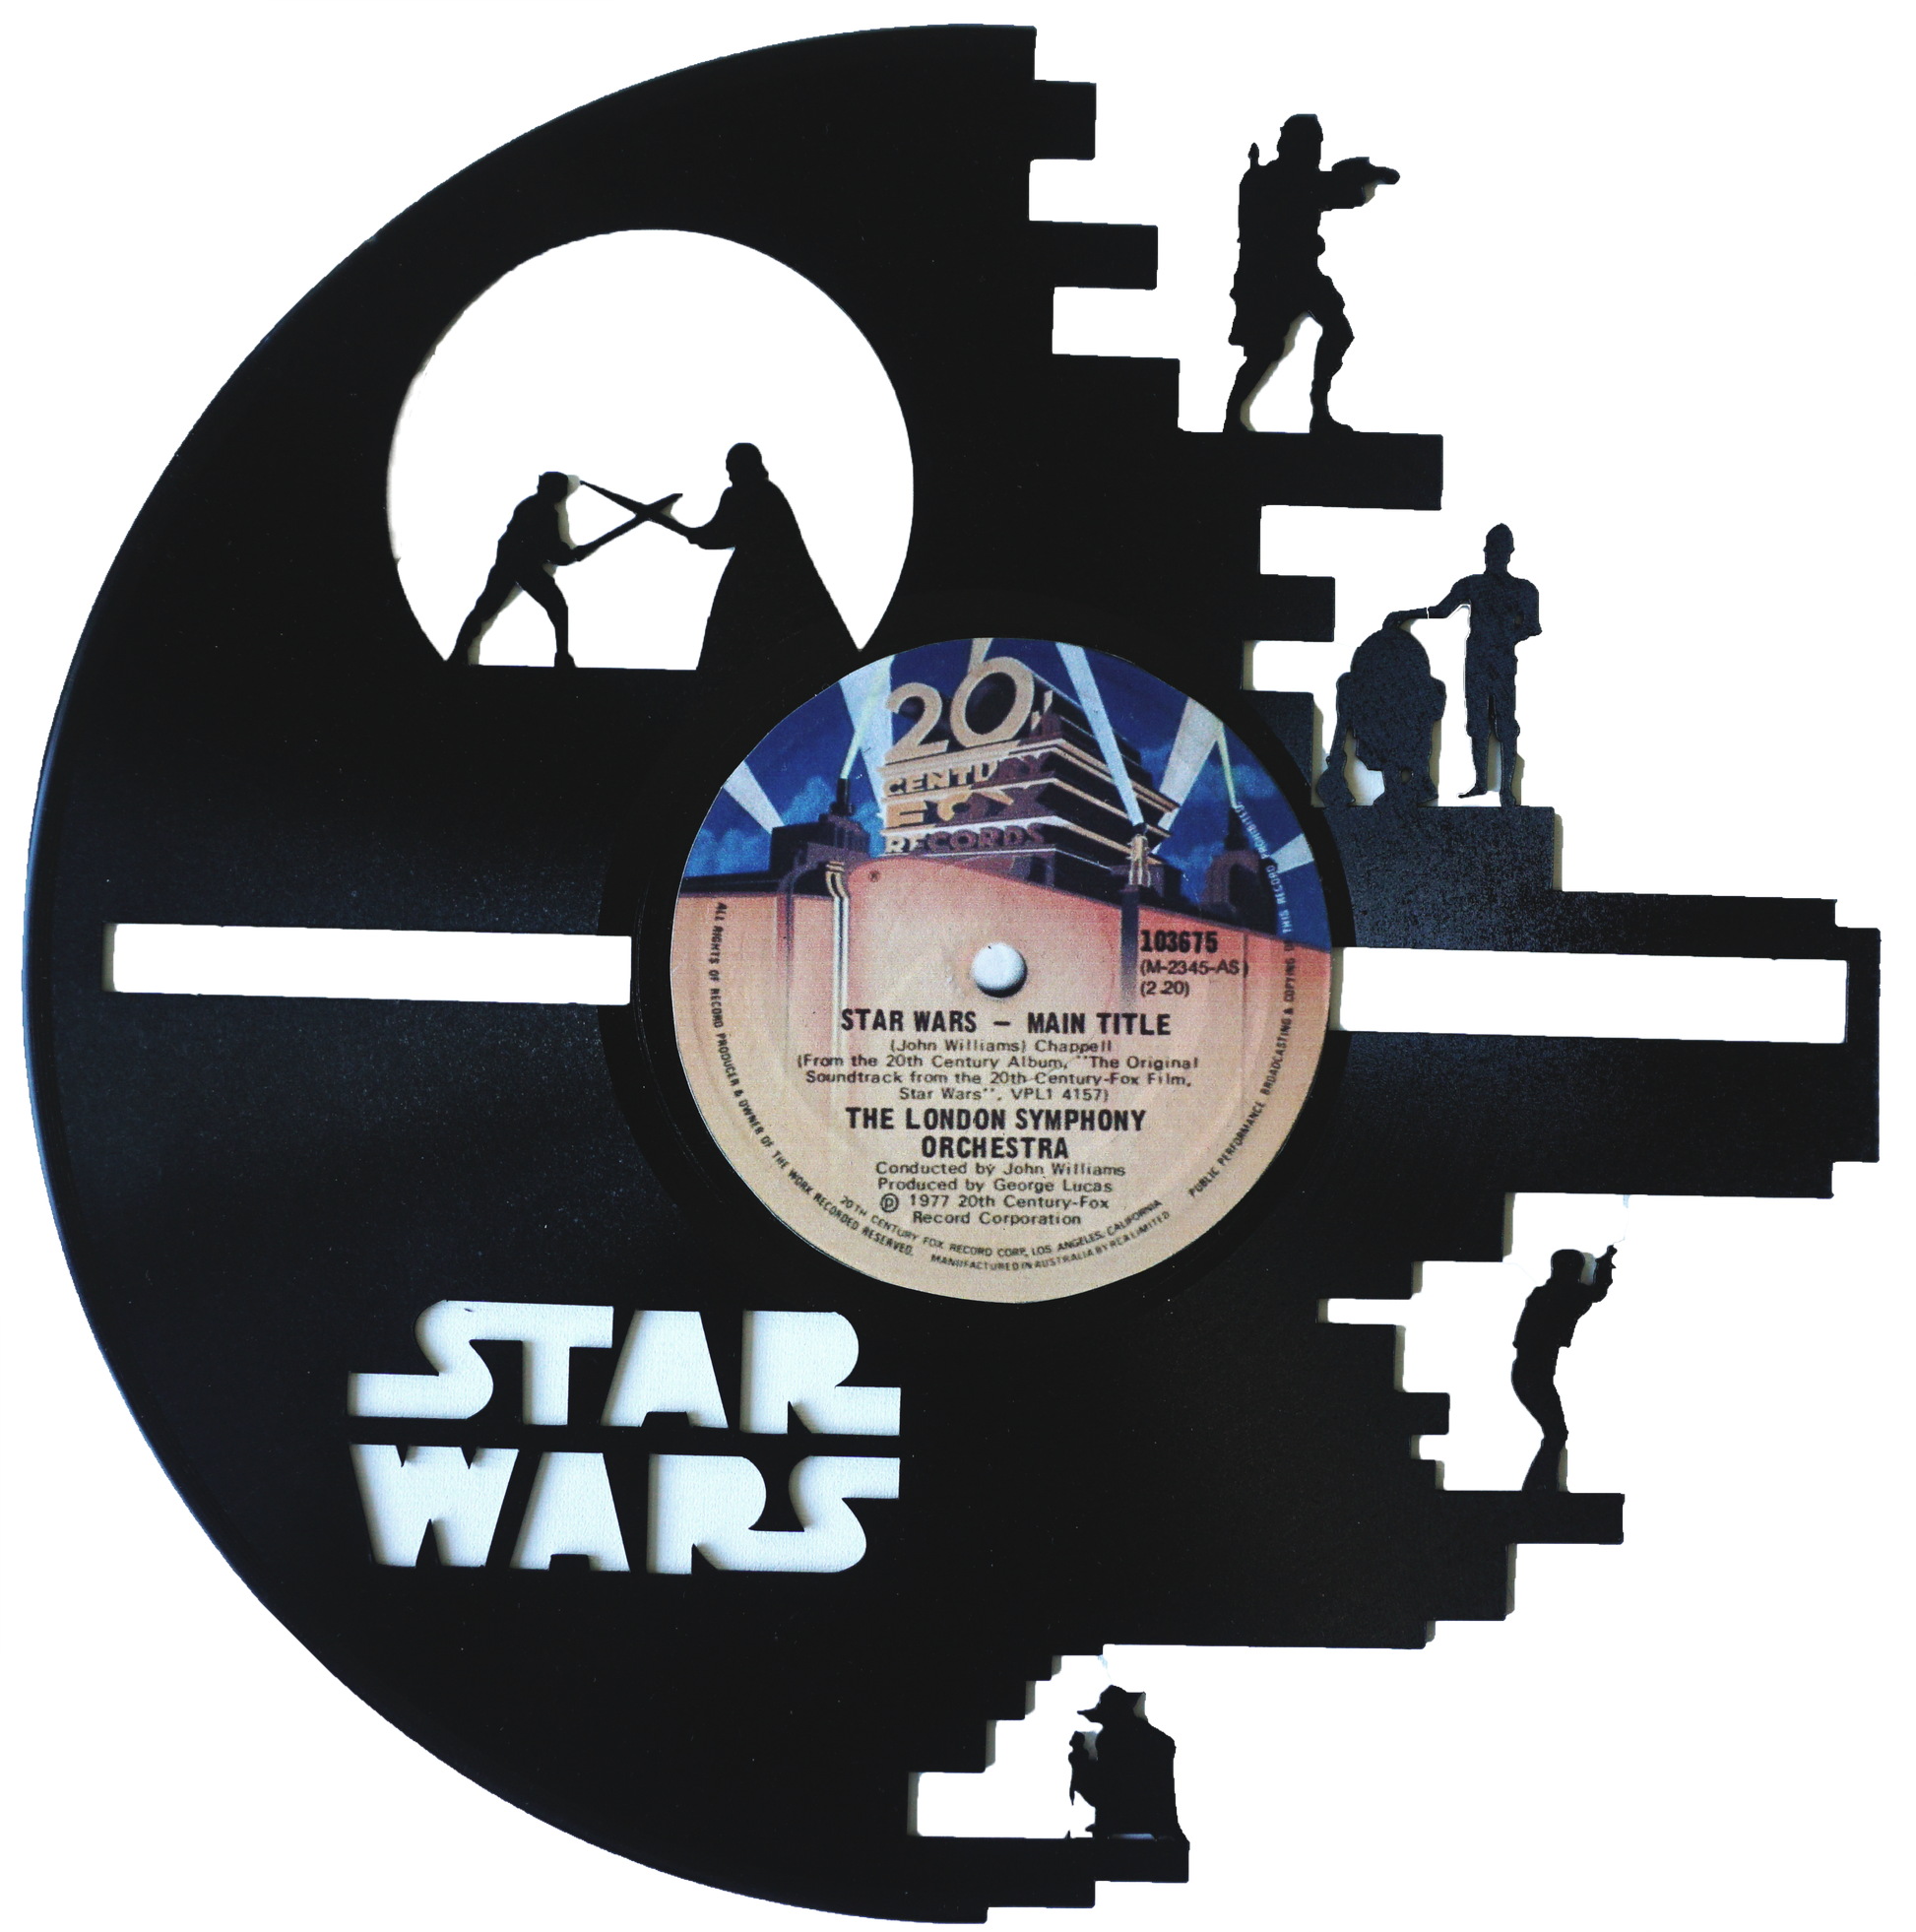 Star Wars Want the force to be with you? Our Star Wars featured LP is perfect for you! Carved with love this decorative Vinyl will stand out in your room with its unique design portraying the iconic movie. Enter the community and #Rockthesewalls. All our Our LP’s are unusable up-cycled Vinyls in need of a second a life. No Vinyls hurted during the process guarantee! They are 33 RPM and measure 30 cm diameter (30 cm x 30 cm (12x12). Products are shipped the day they are ordered if ordered before 4 pm, ship